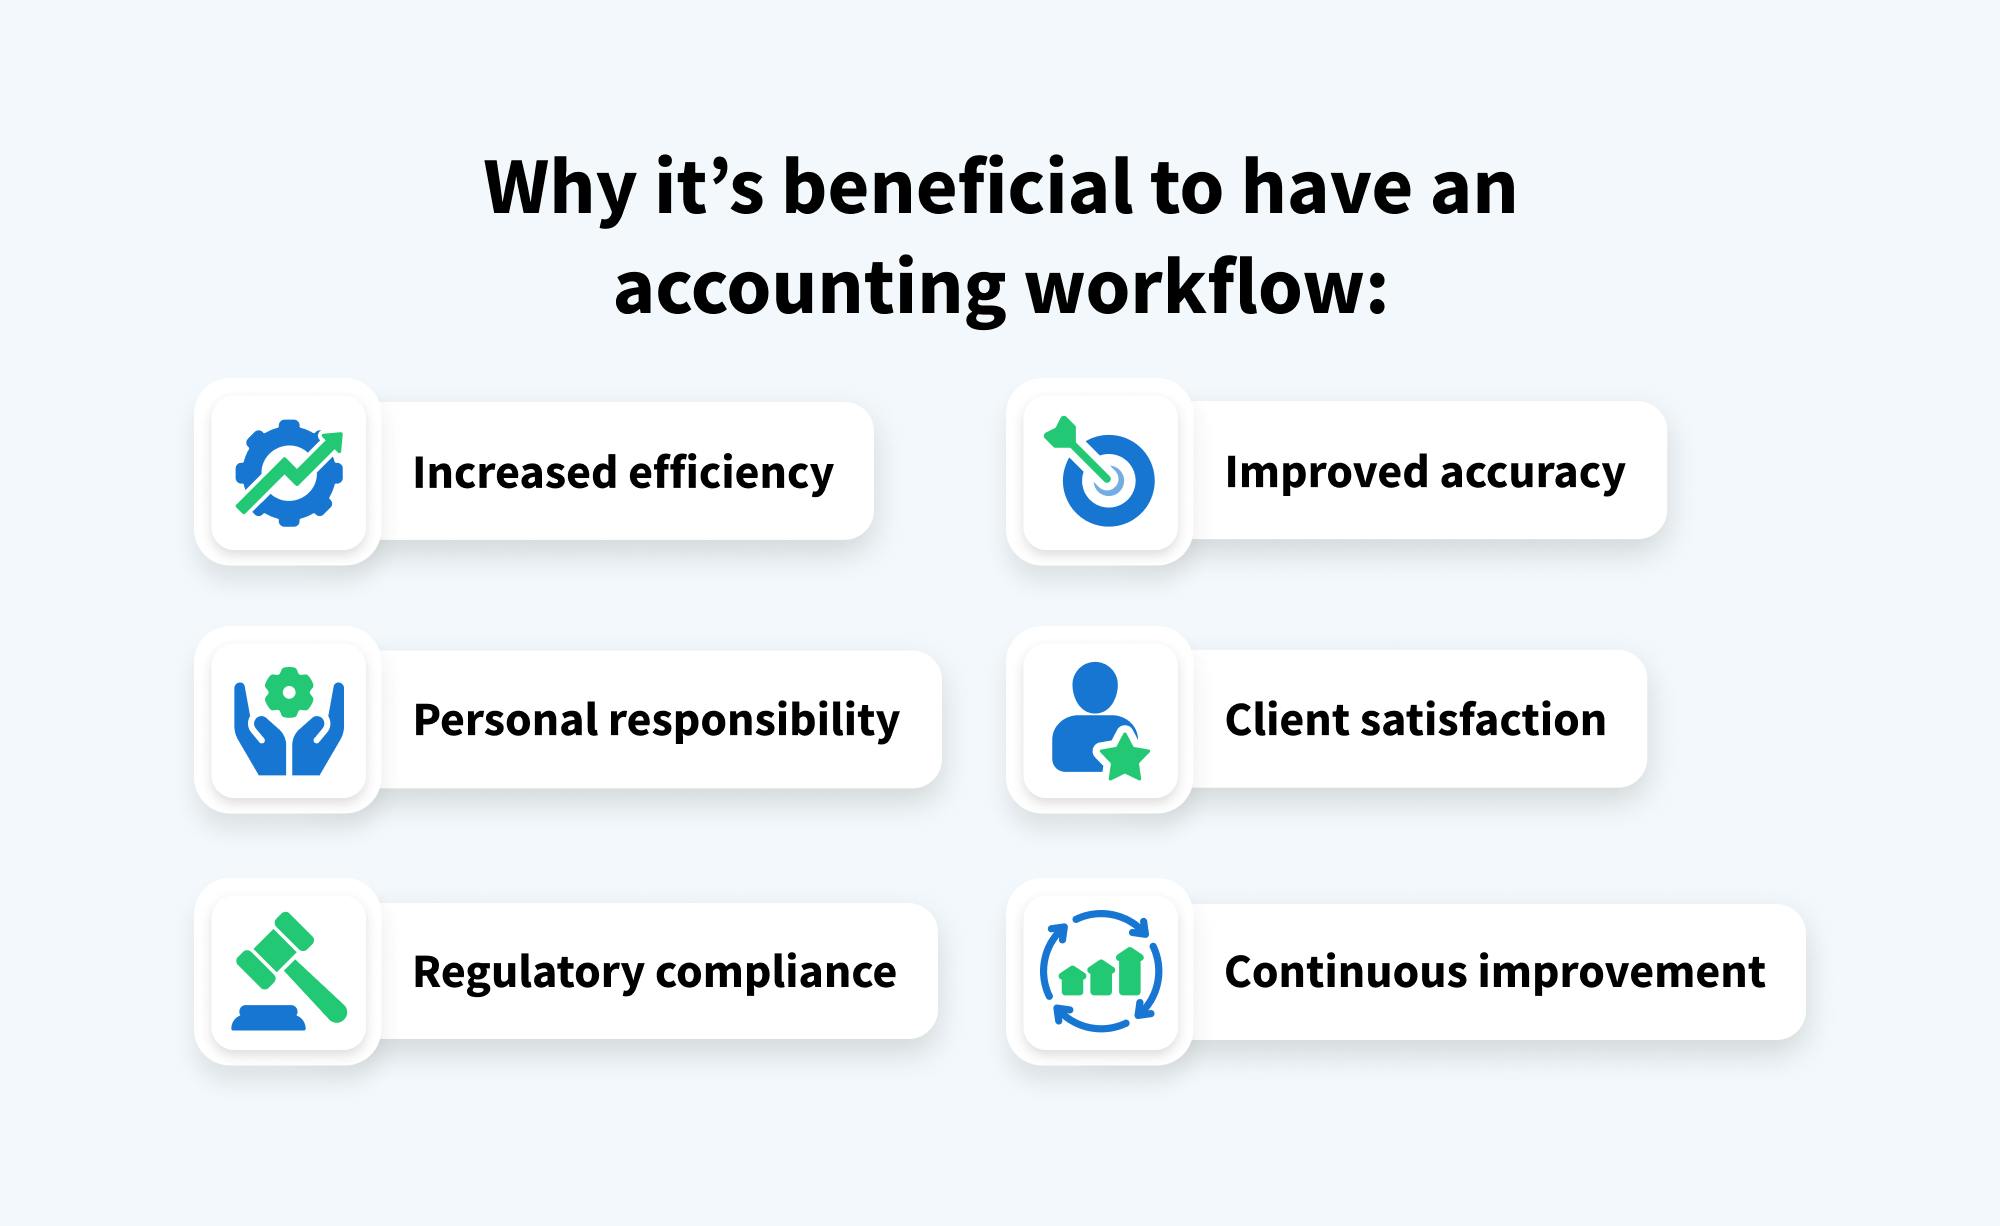 The benefits of having an accounting workflow